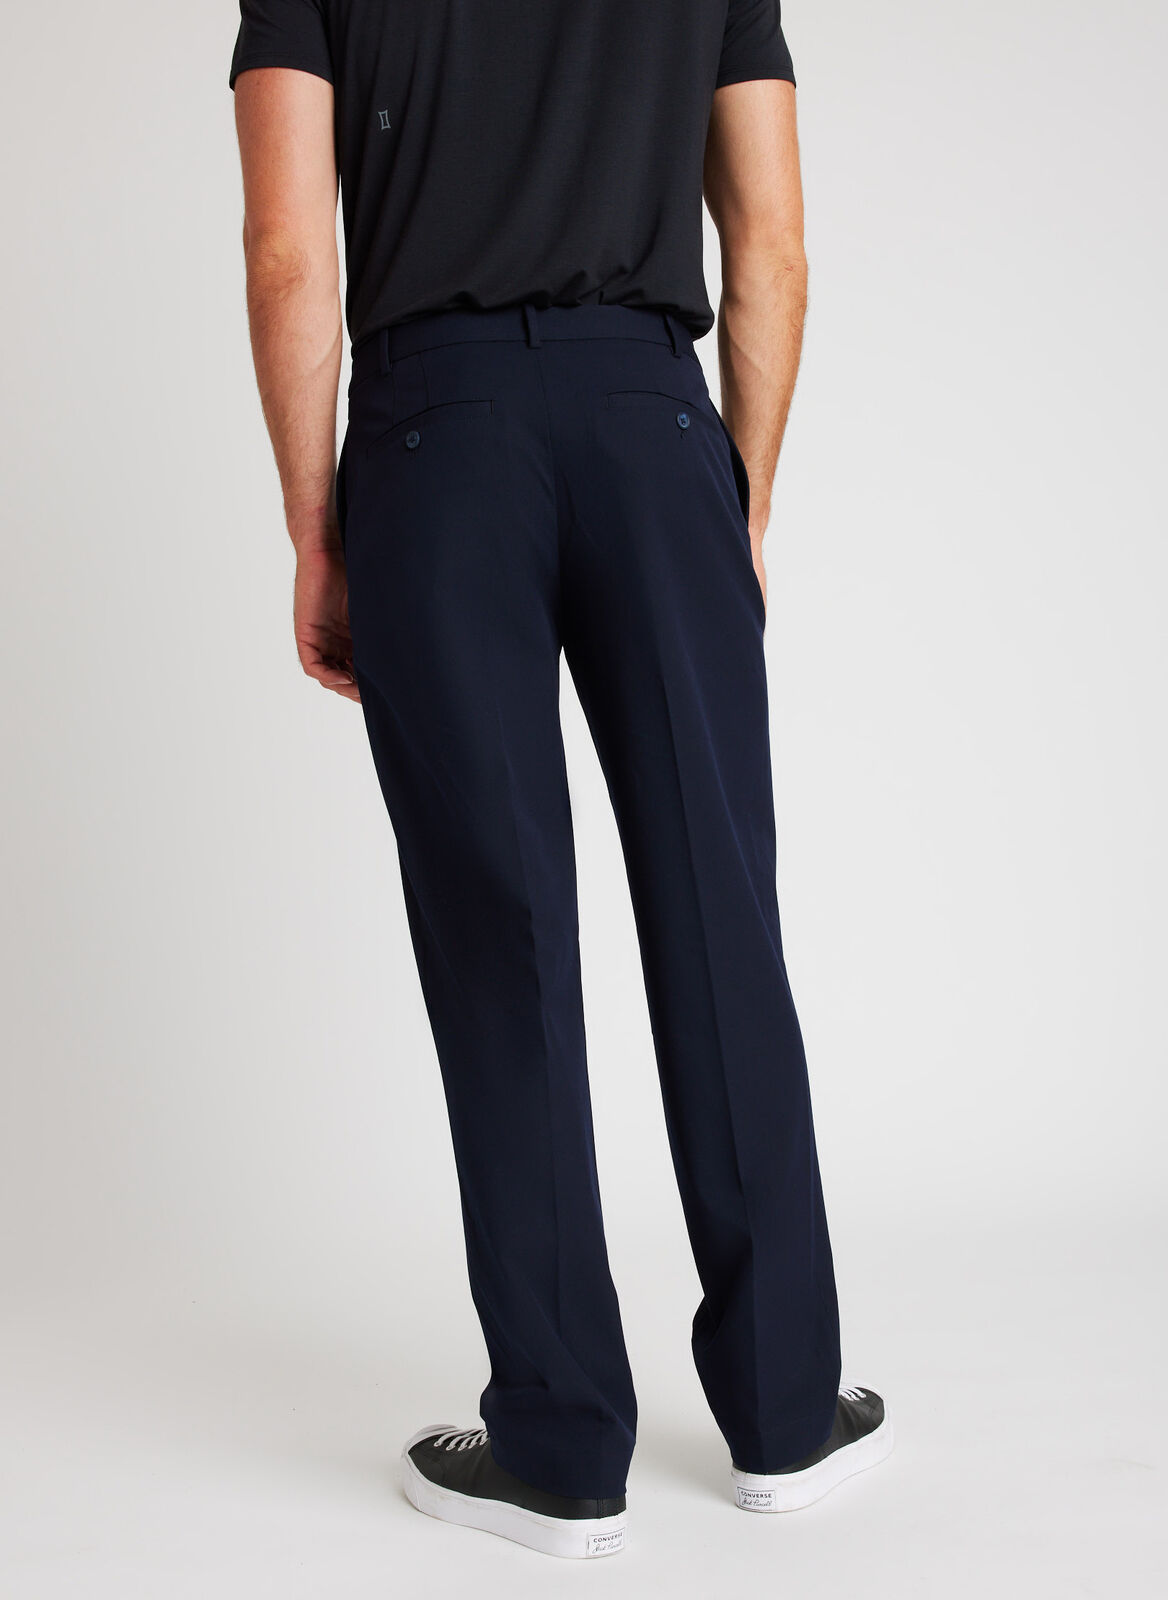 Kit and Ace — Stellar Recycled Suiting Trousers Standard Fit